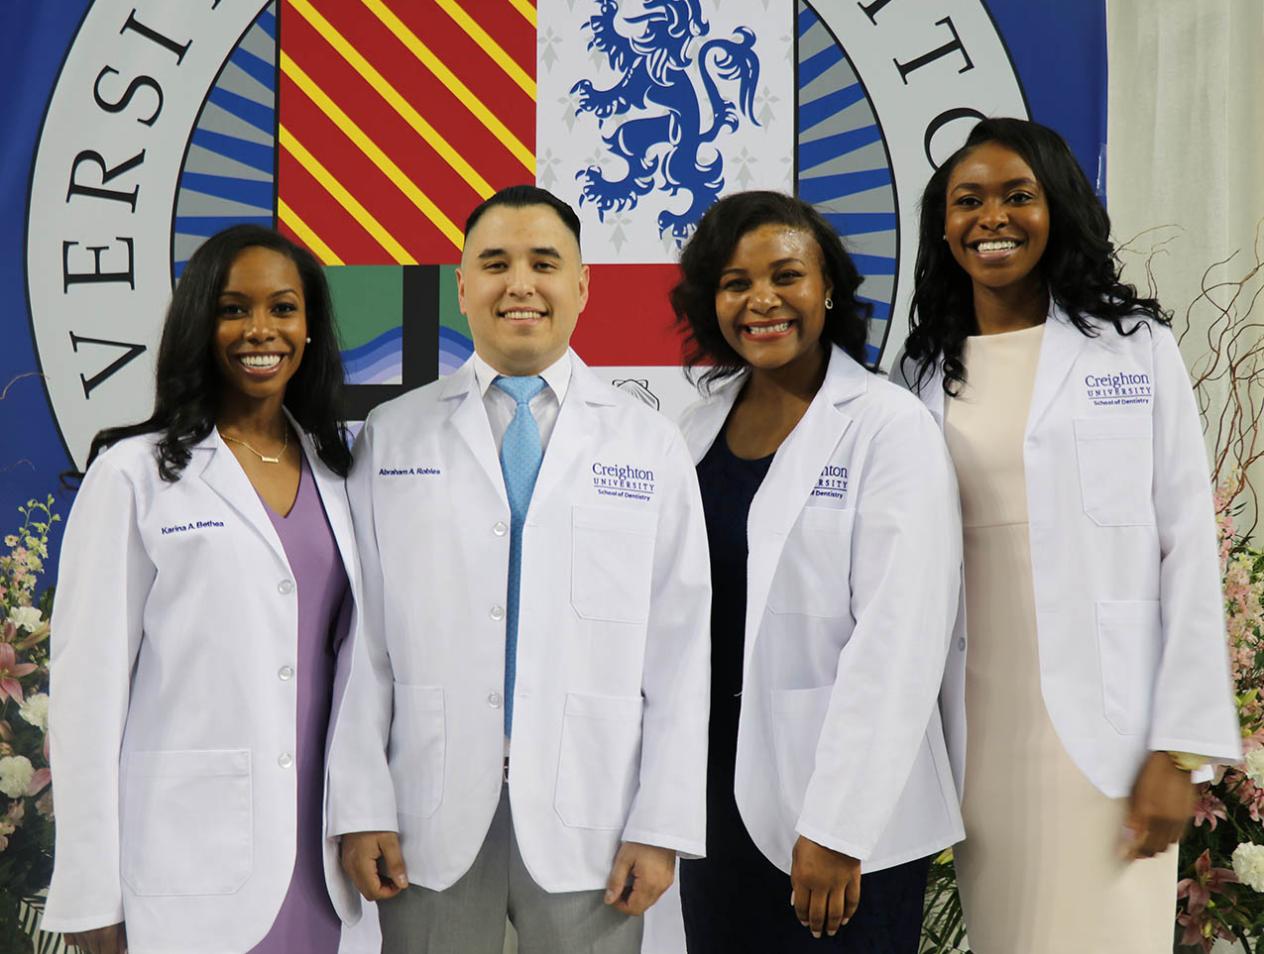 Students smiling in Creighton white coats.